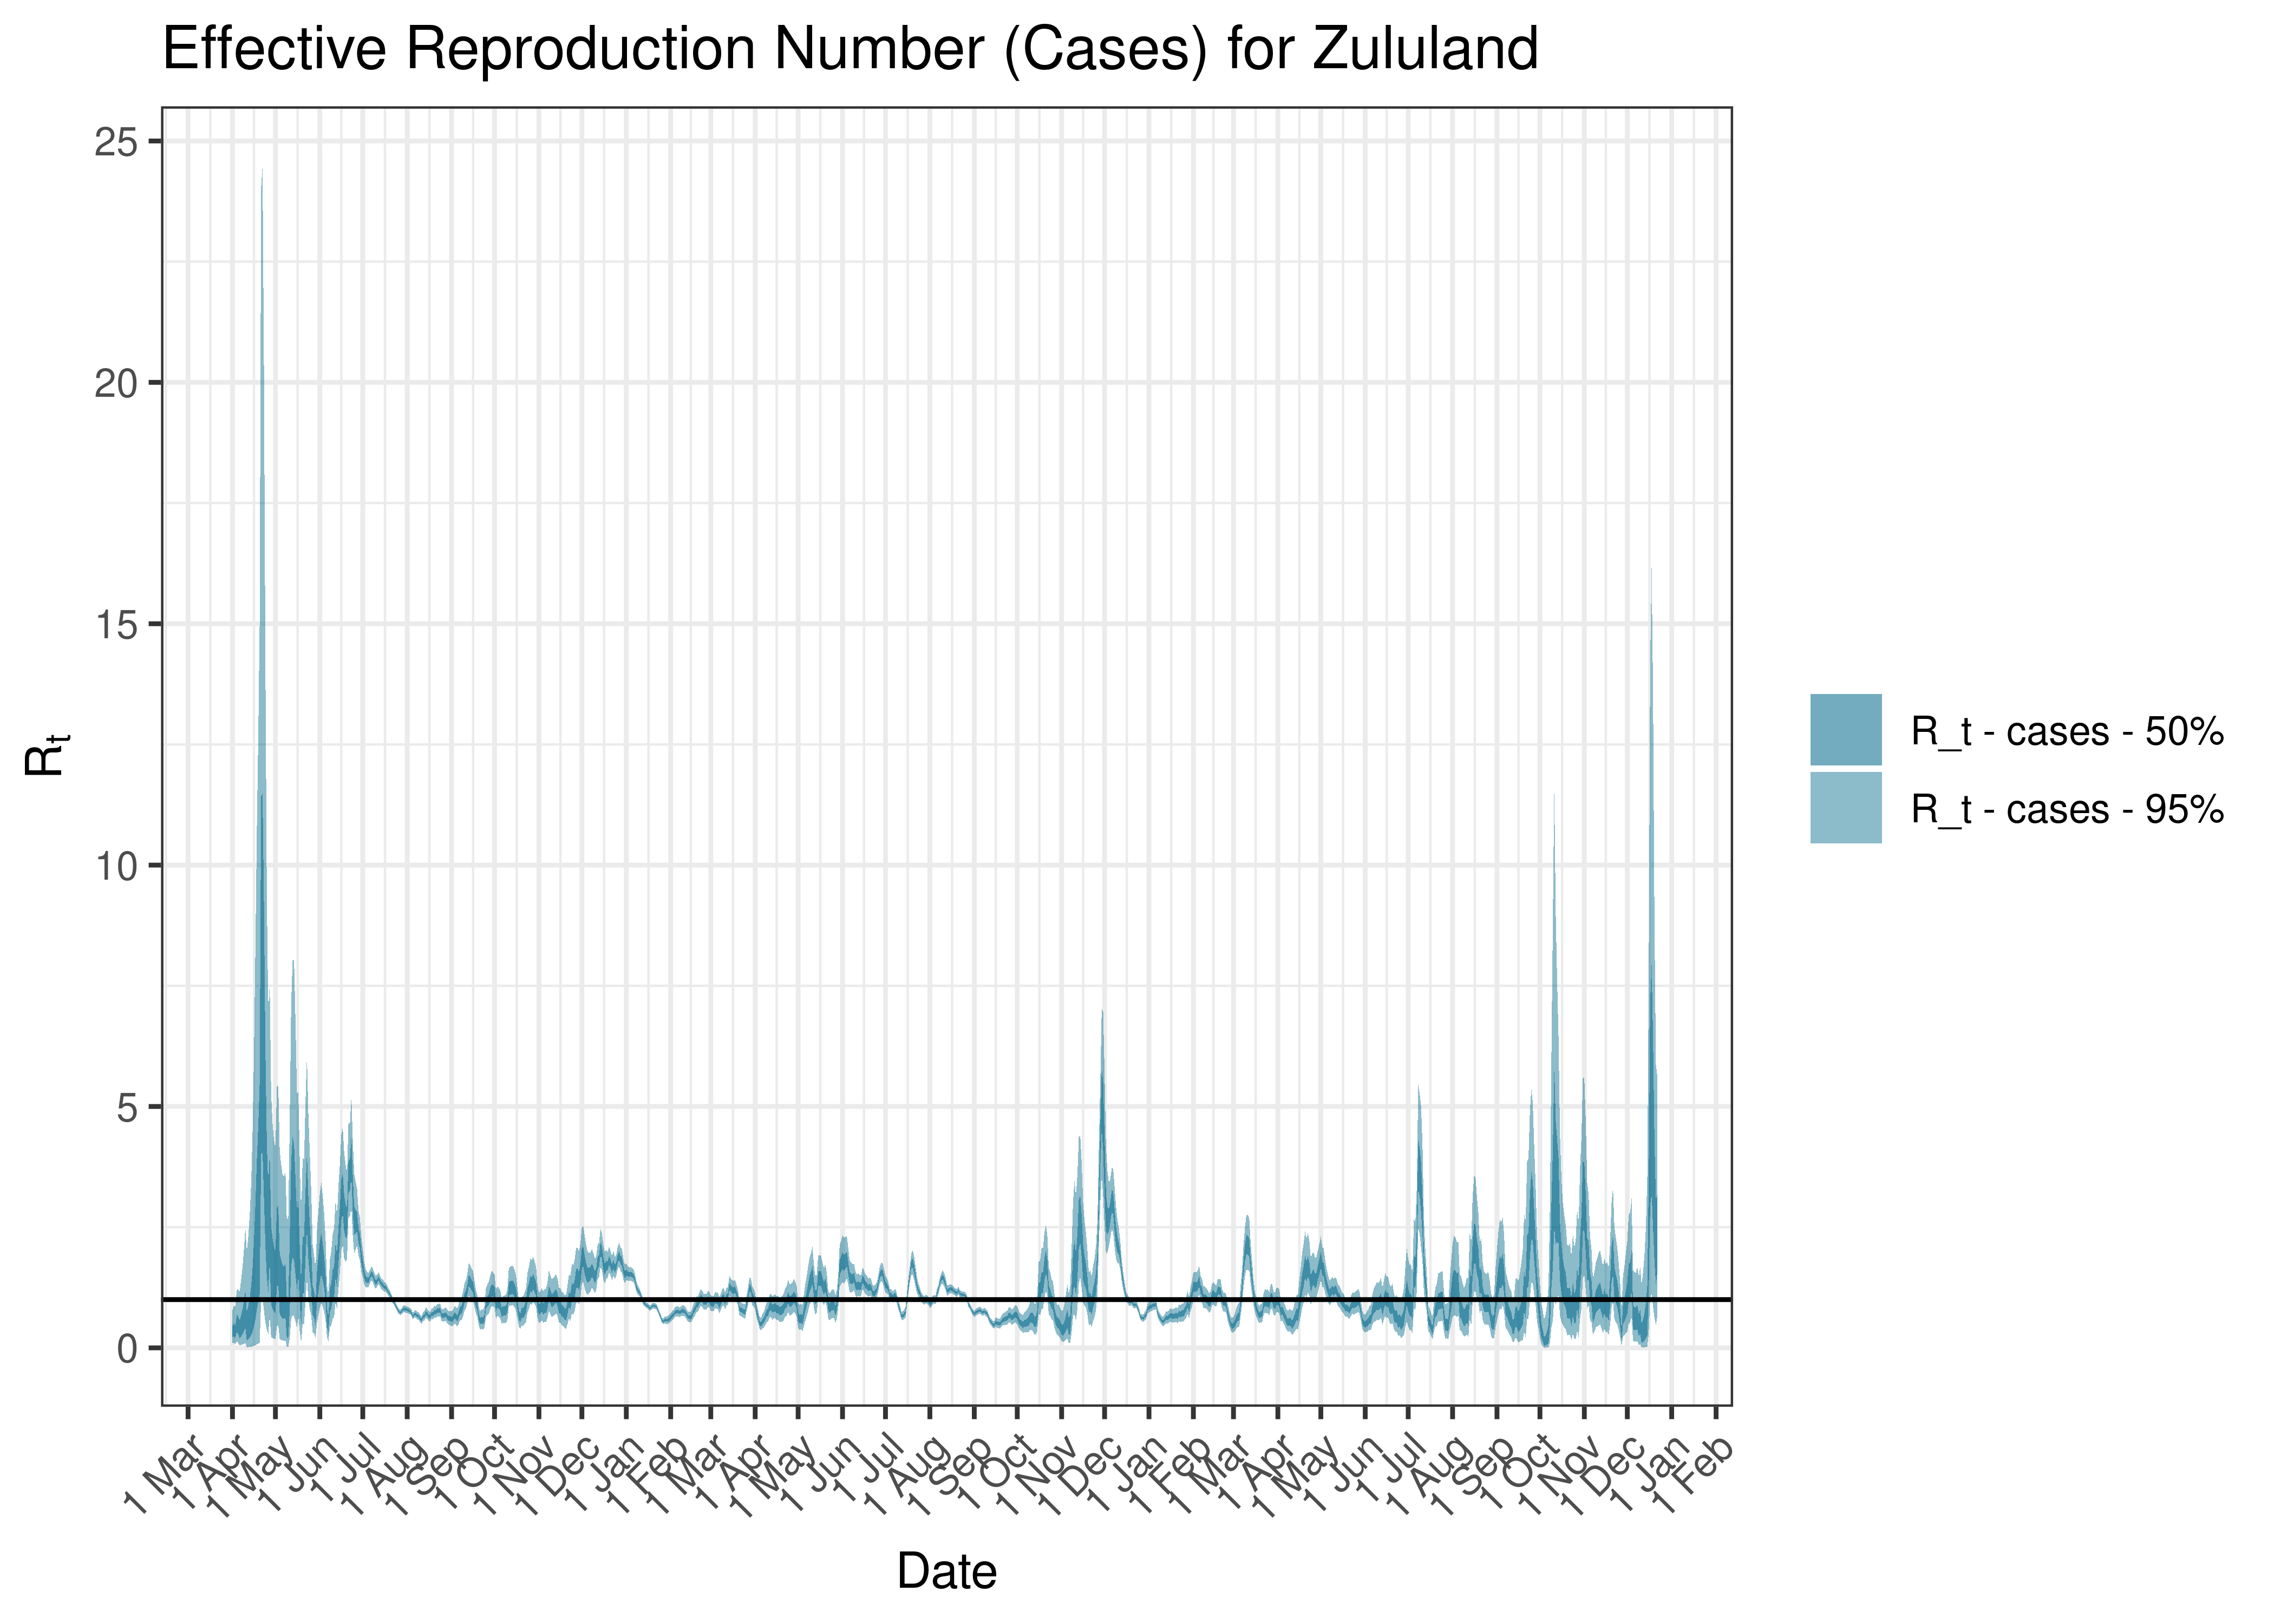 Estimated Effective Reproduction Number Based on Cases for Zululand since 1 April 2020